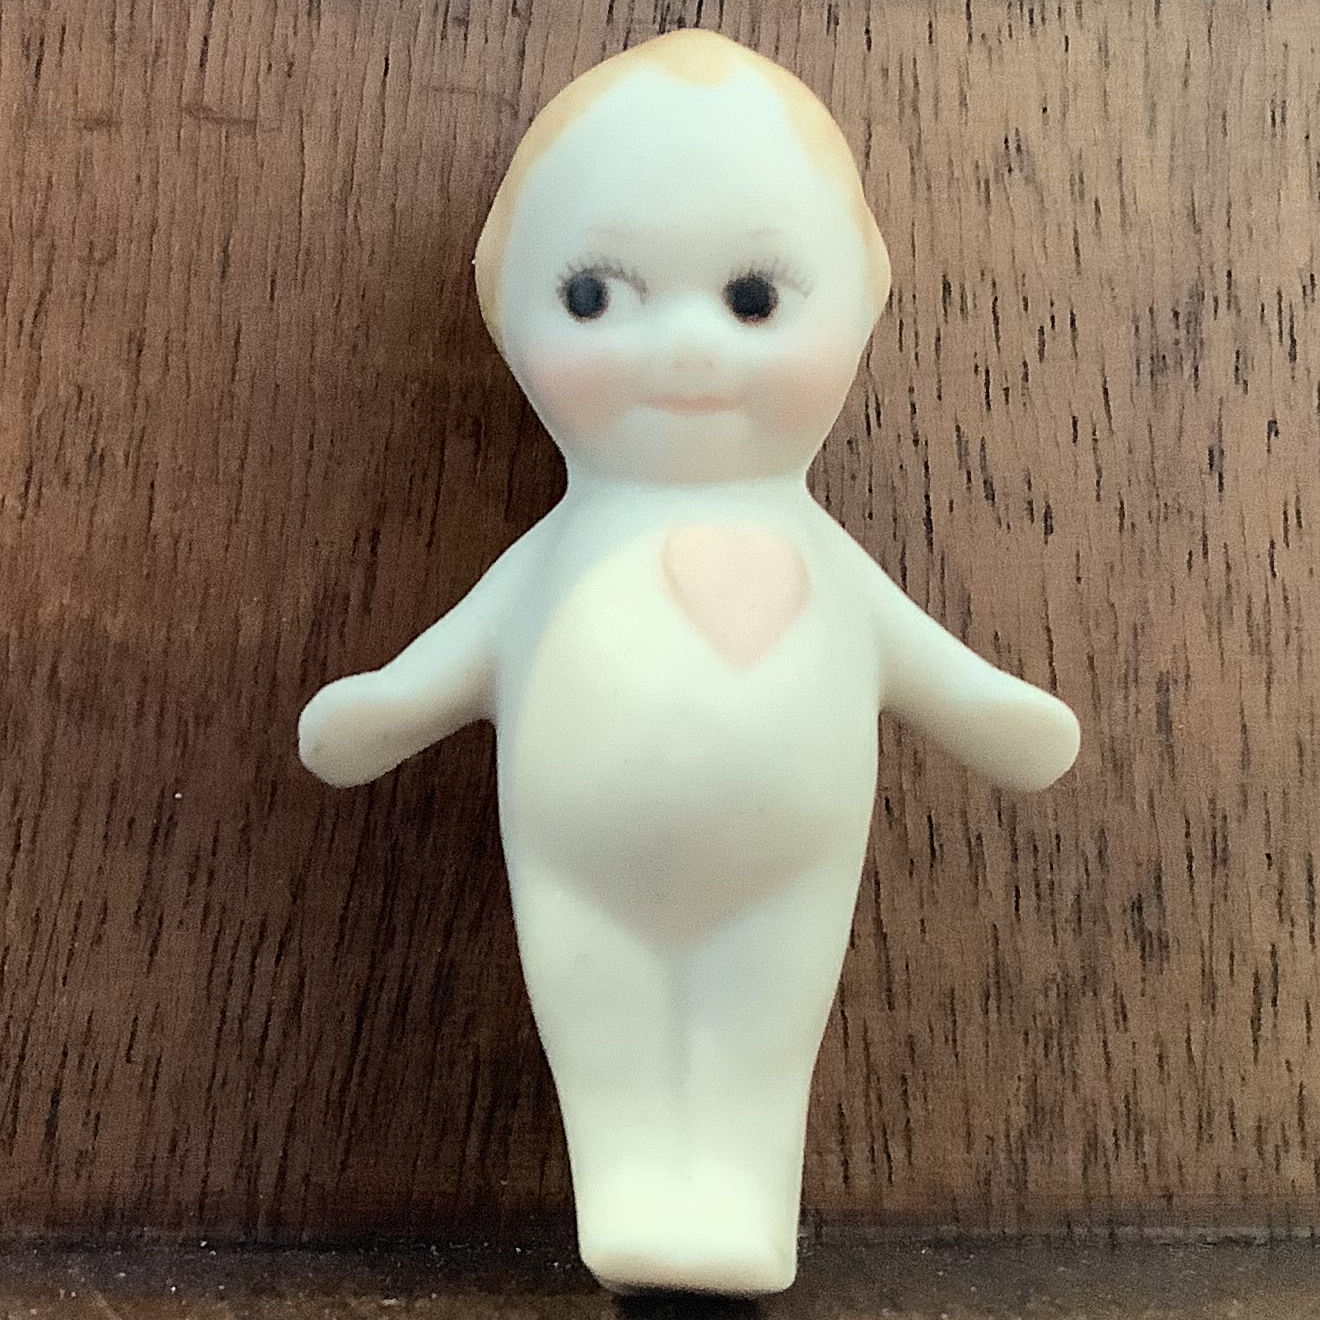 Kewpie doll brooch; naked baby with heart printed on chest and pointed blond hair